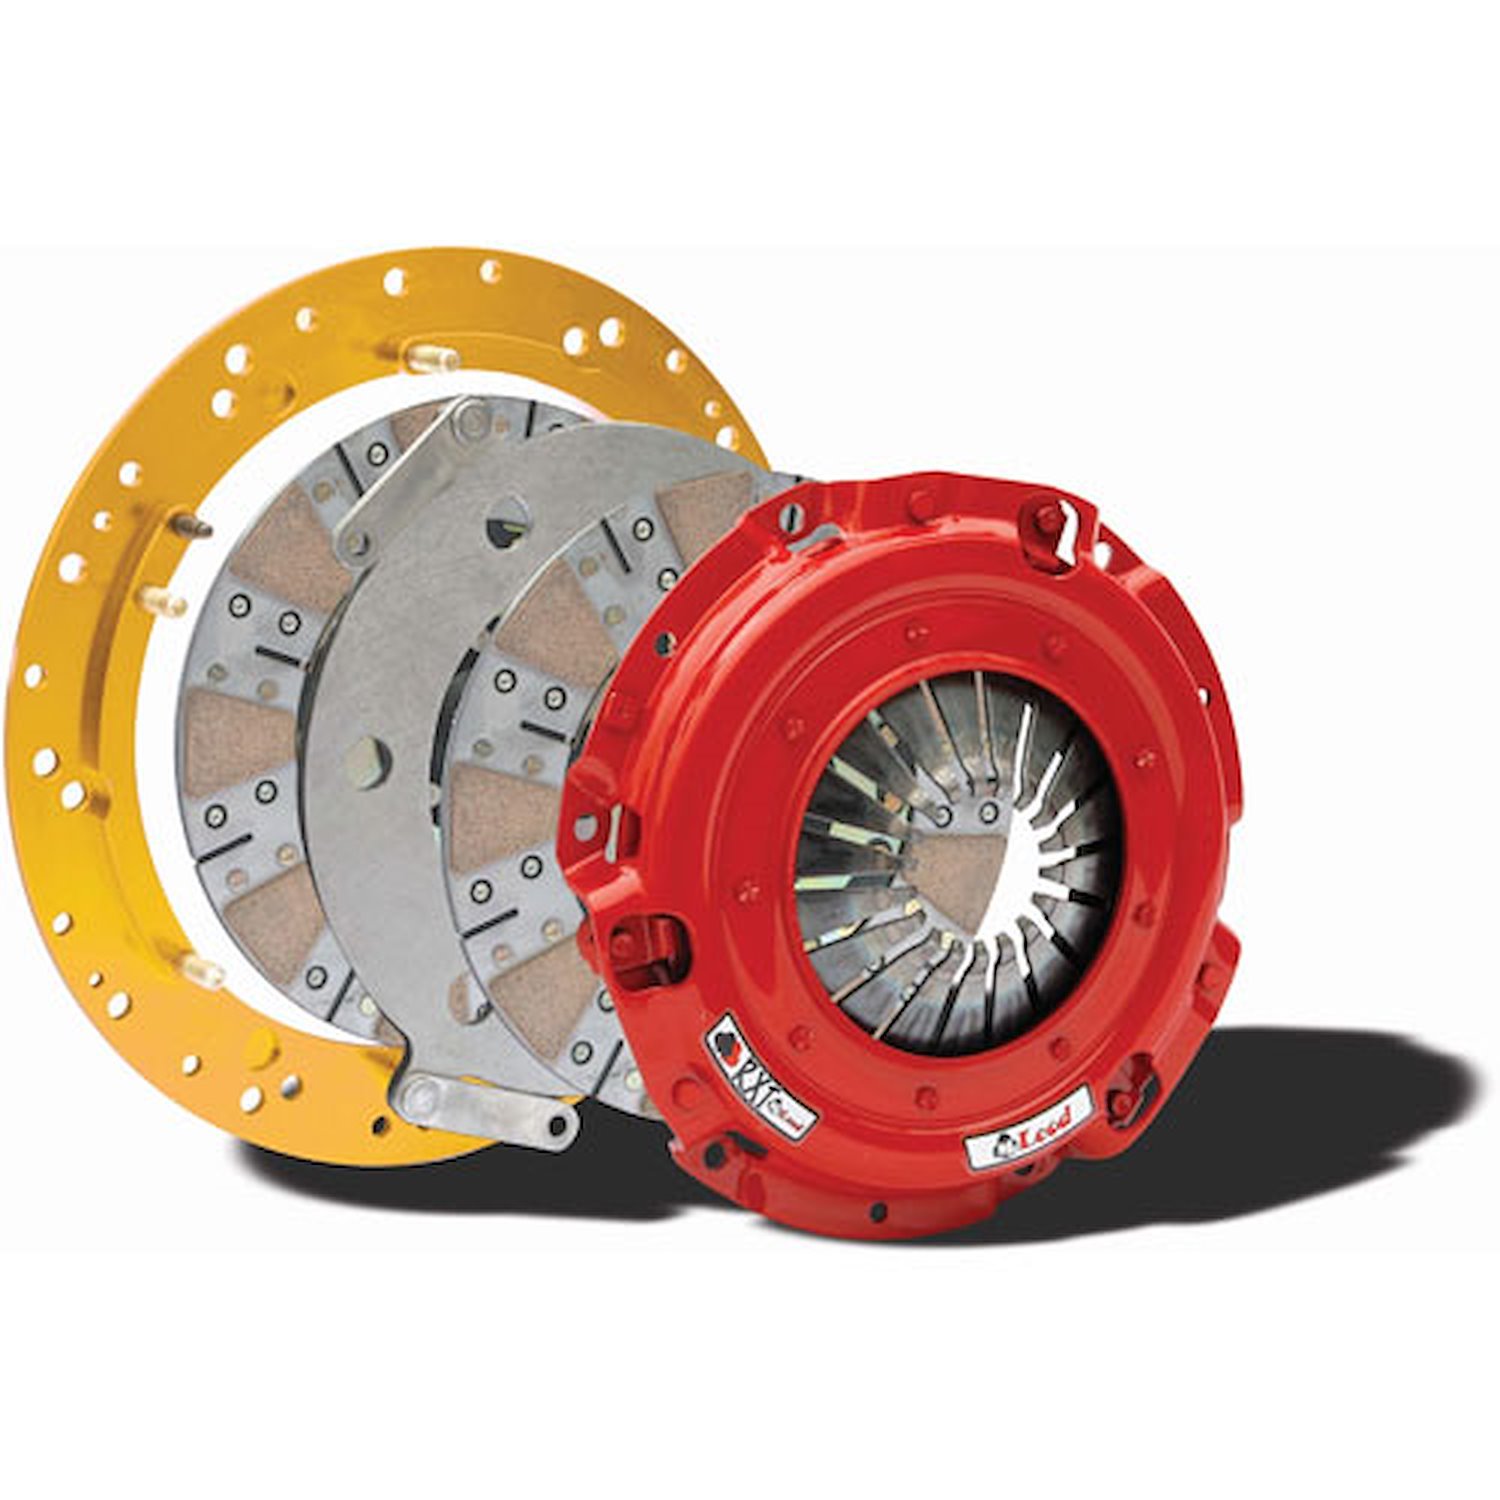 The RXT 1200 Twin Disc Clutch is capable